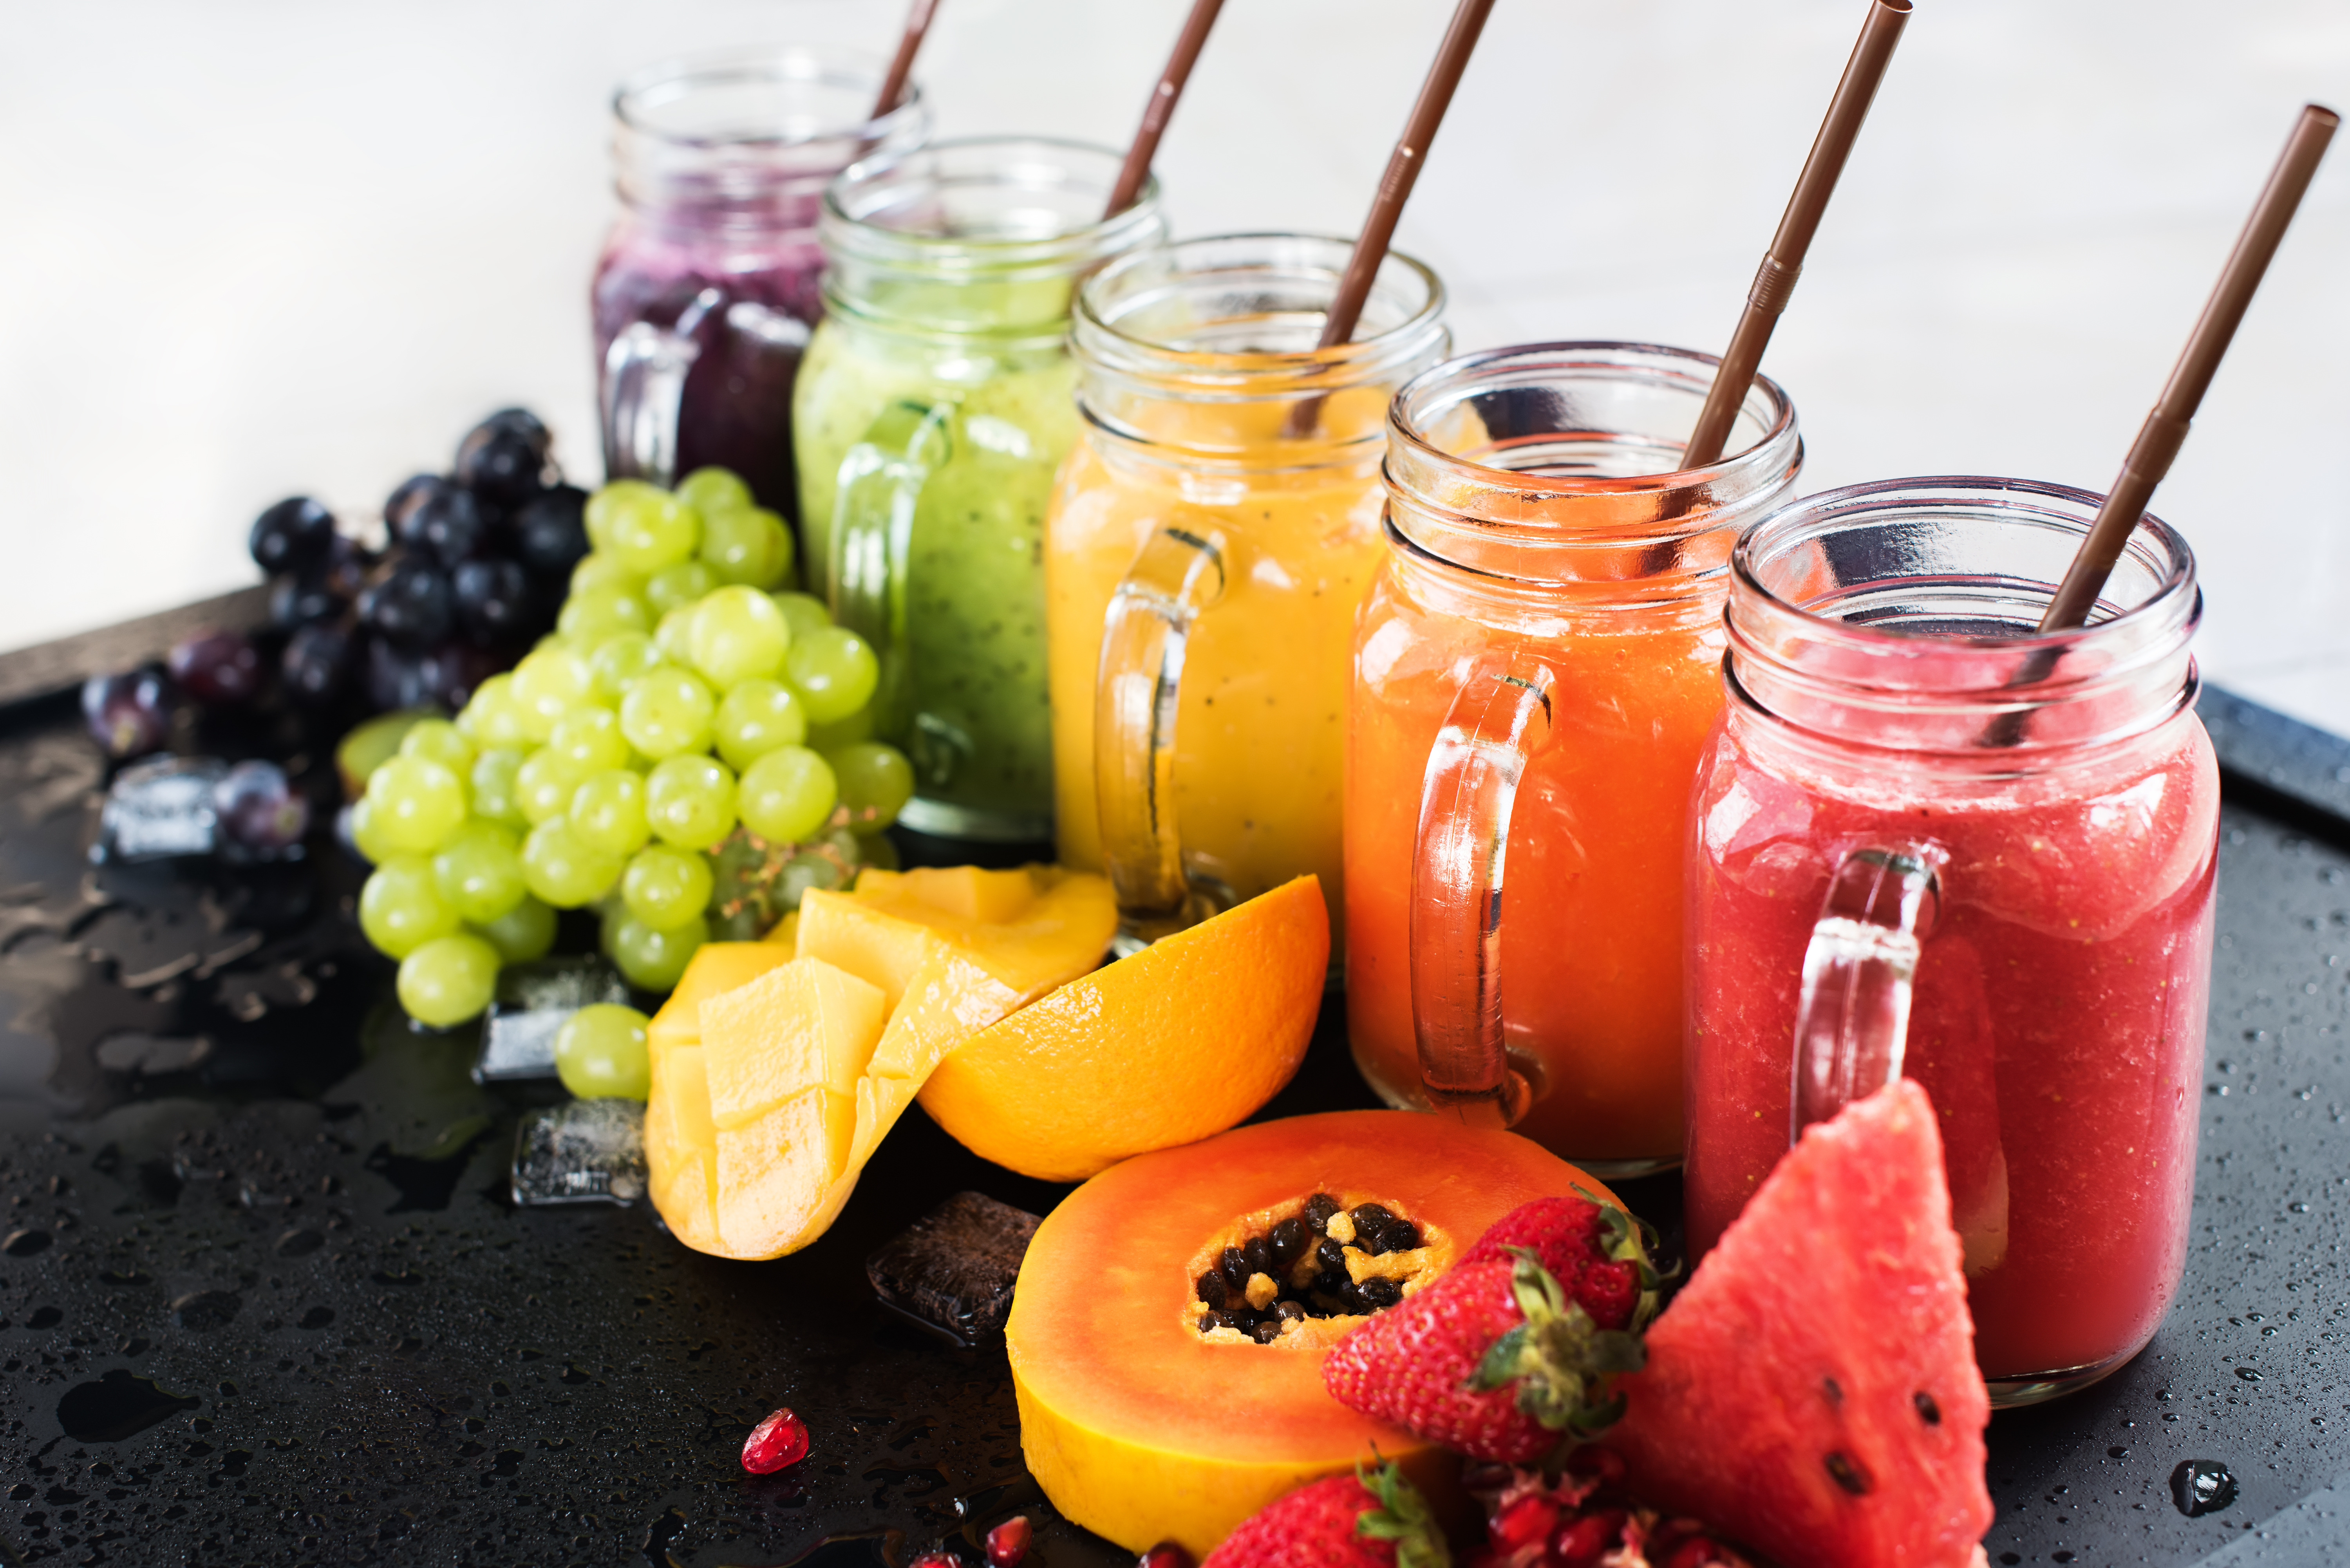 Fresh fruit and fresh squeezed juice in glass mugs